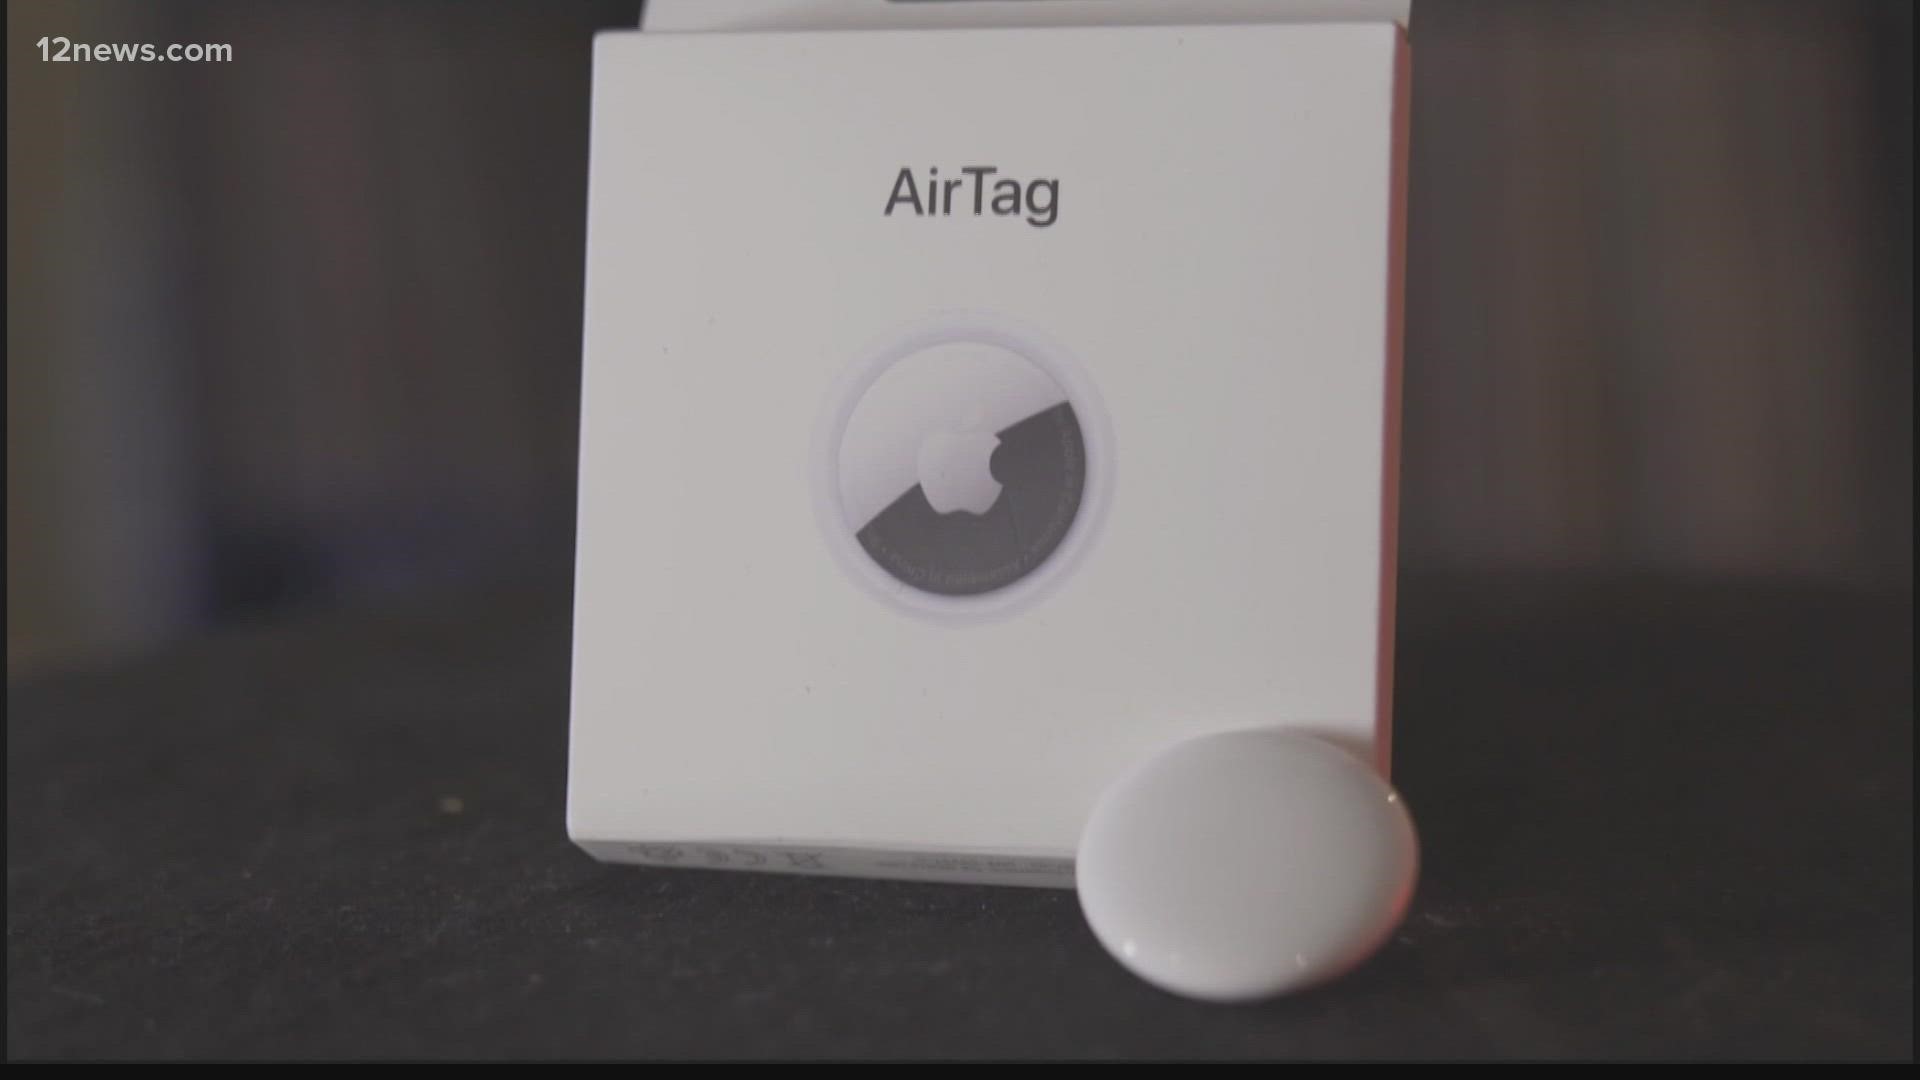 Items like Apple AirTags have been flying off shelves, but experts say that the convenience they provide can have major unintended consequences.